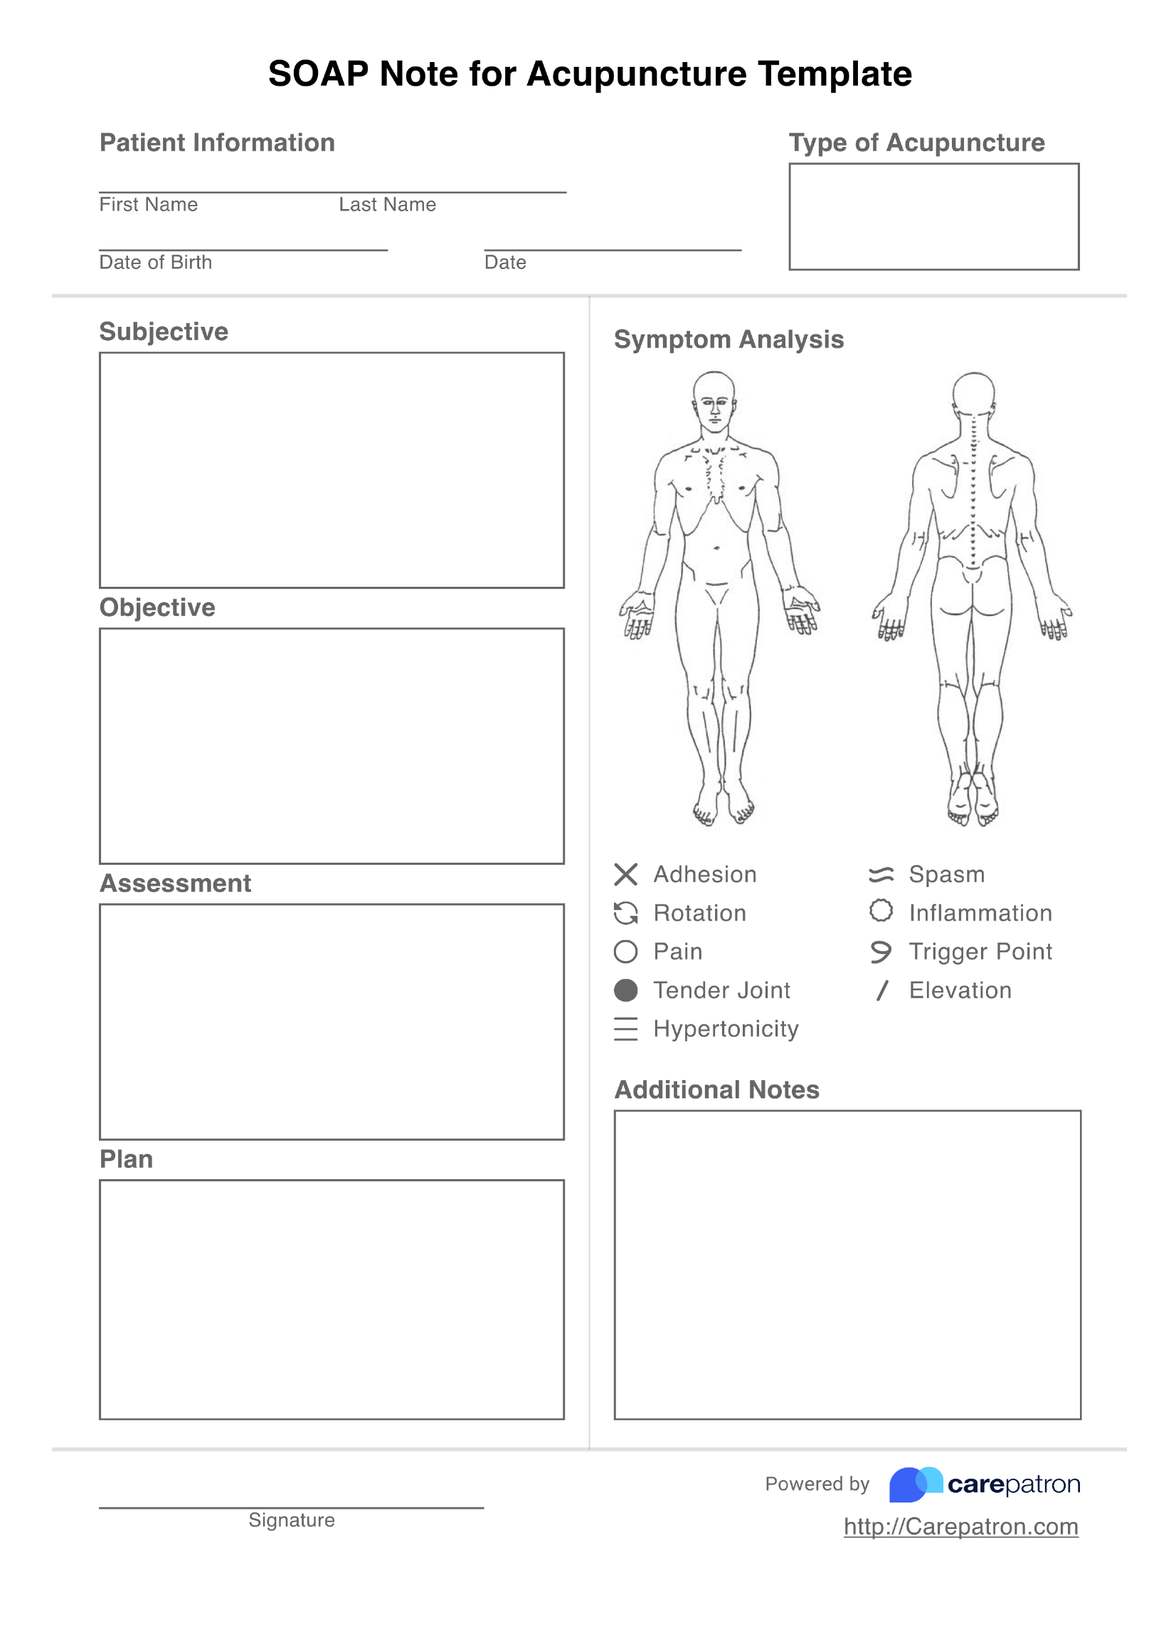 SOAP Notes For Acupuncture Template PDF Example